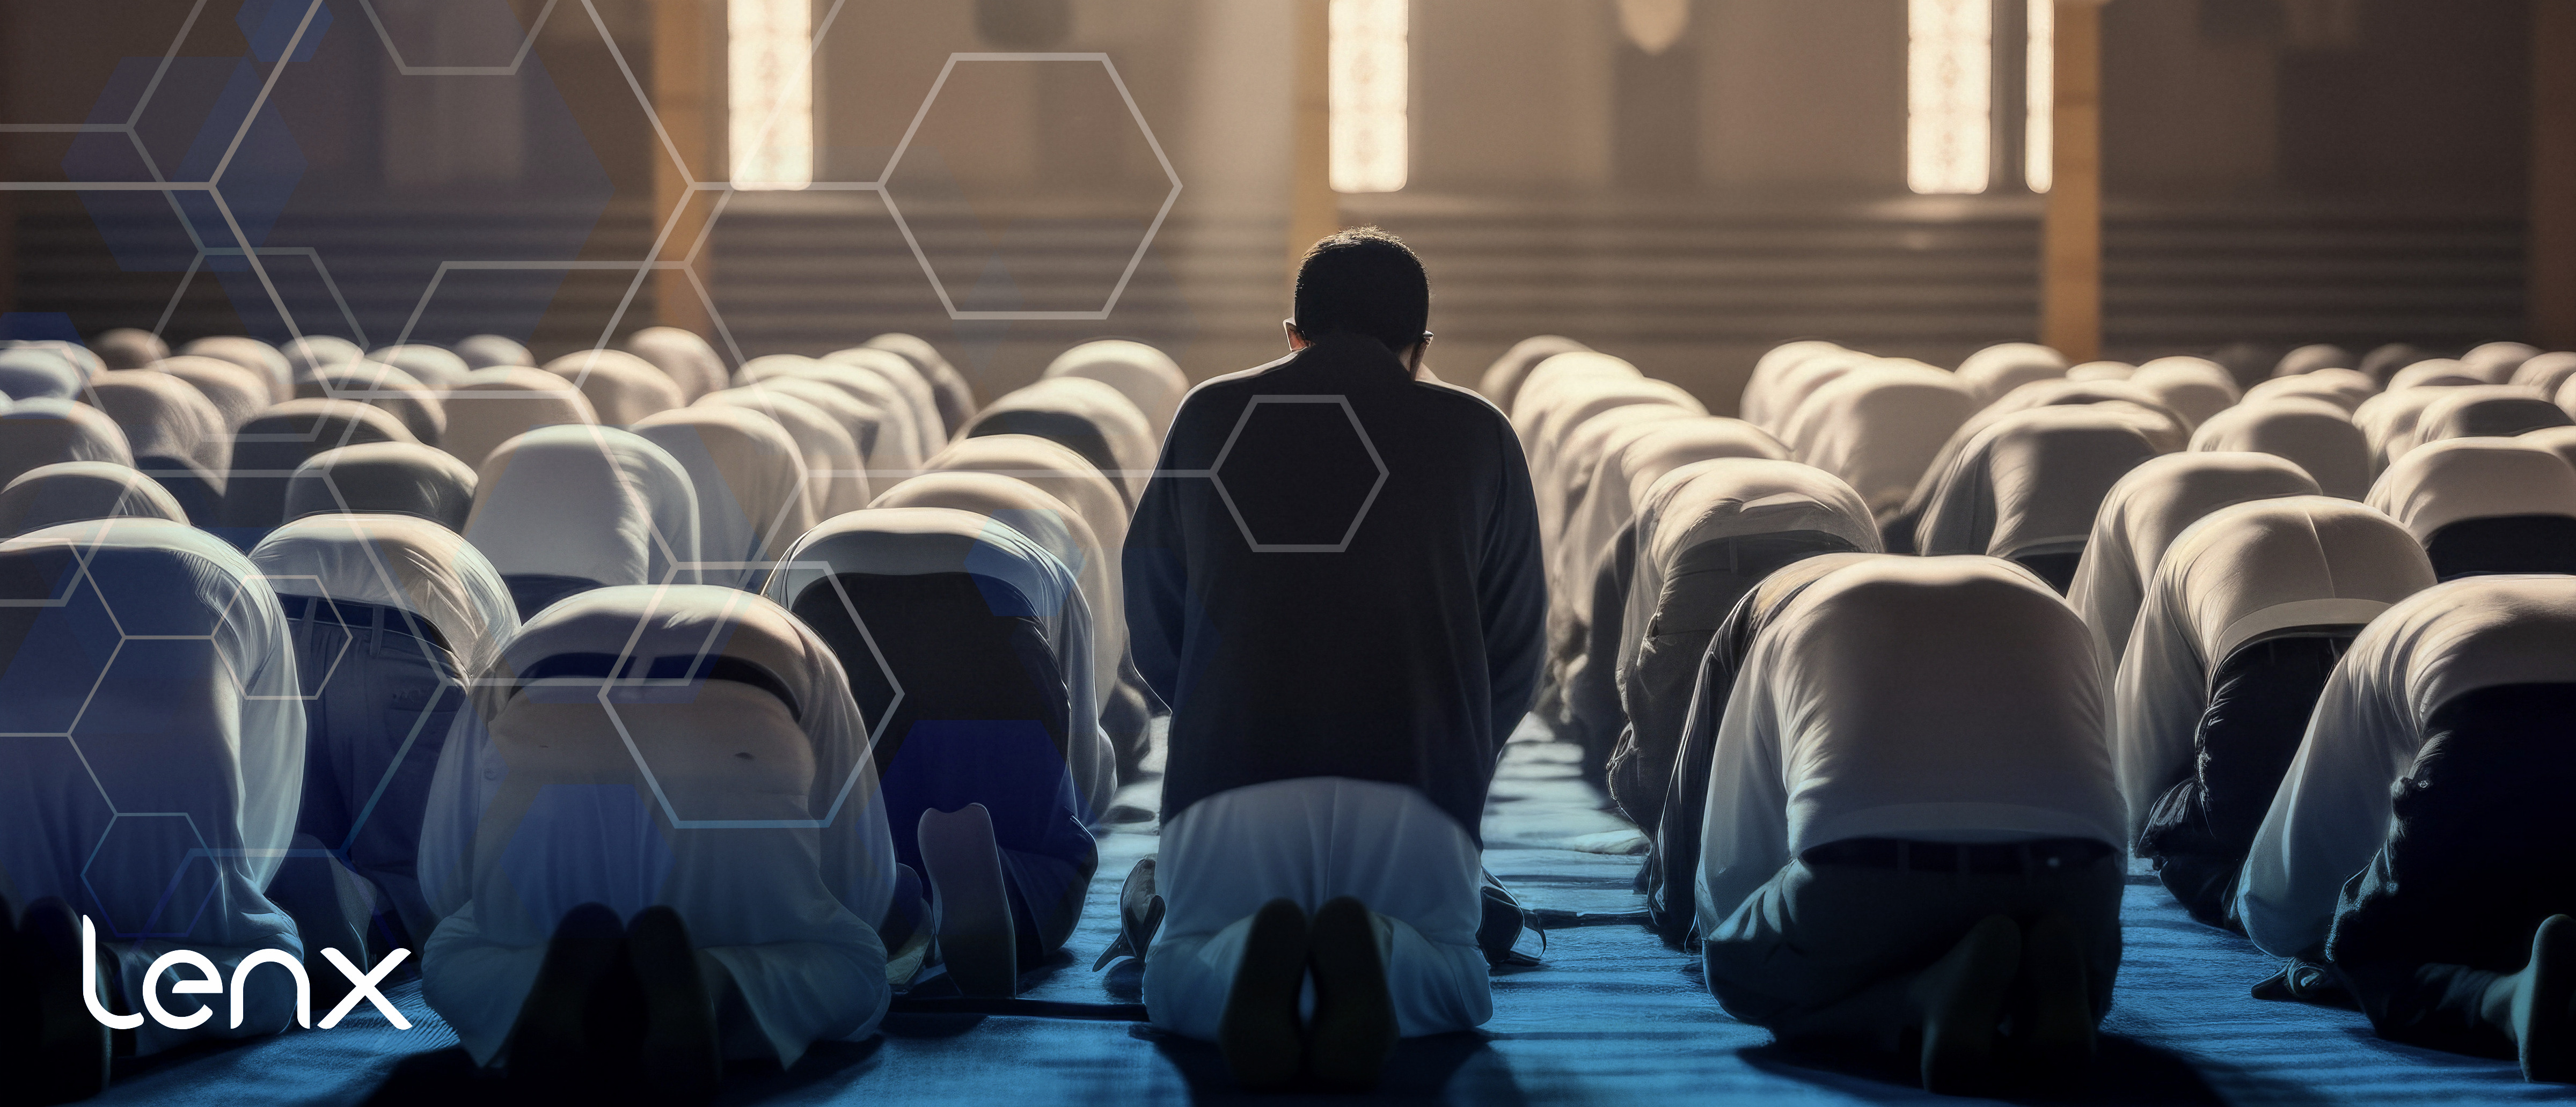 Protecting Houses of Worship: Using AI Security and Active Shooter Detection